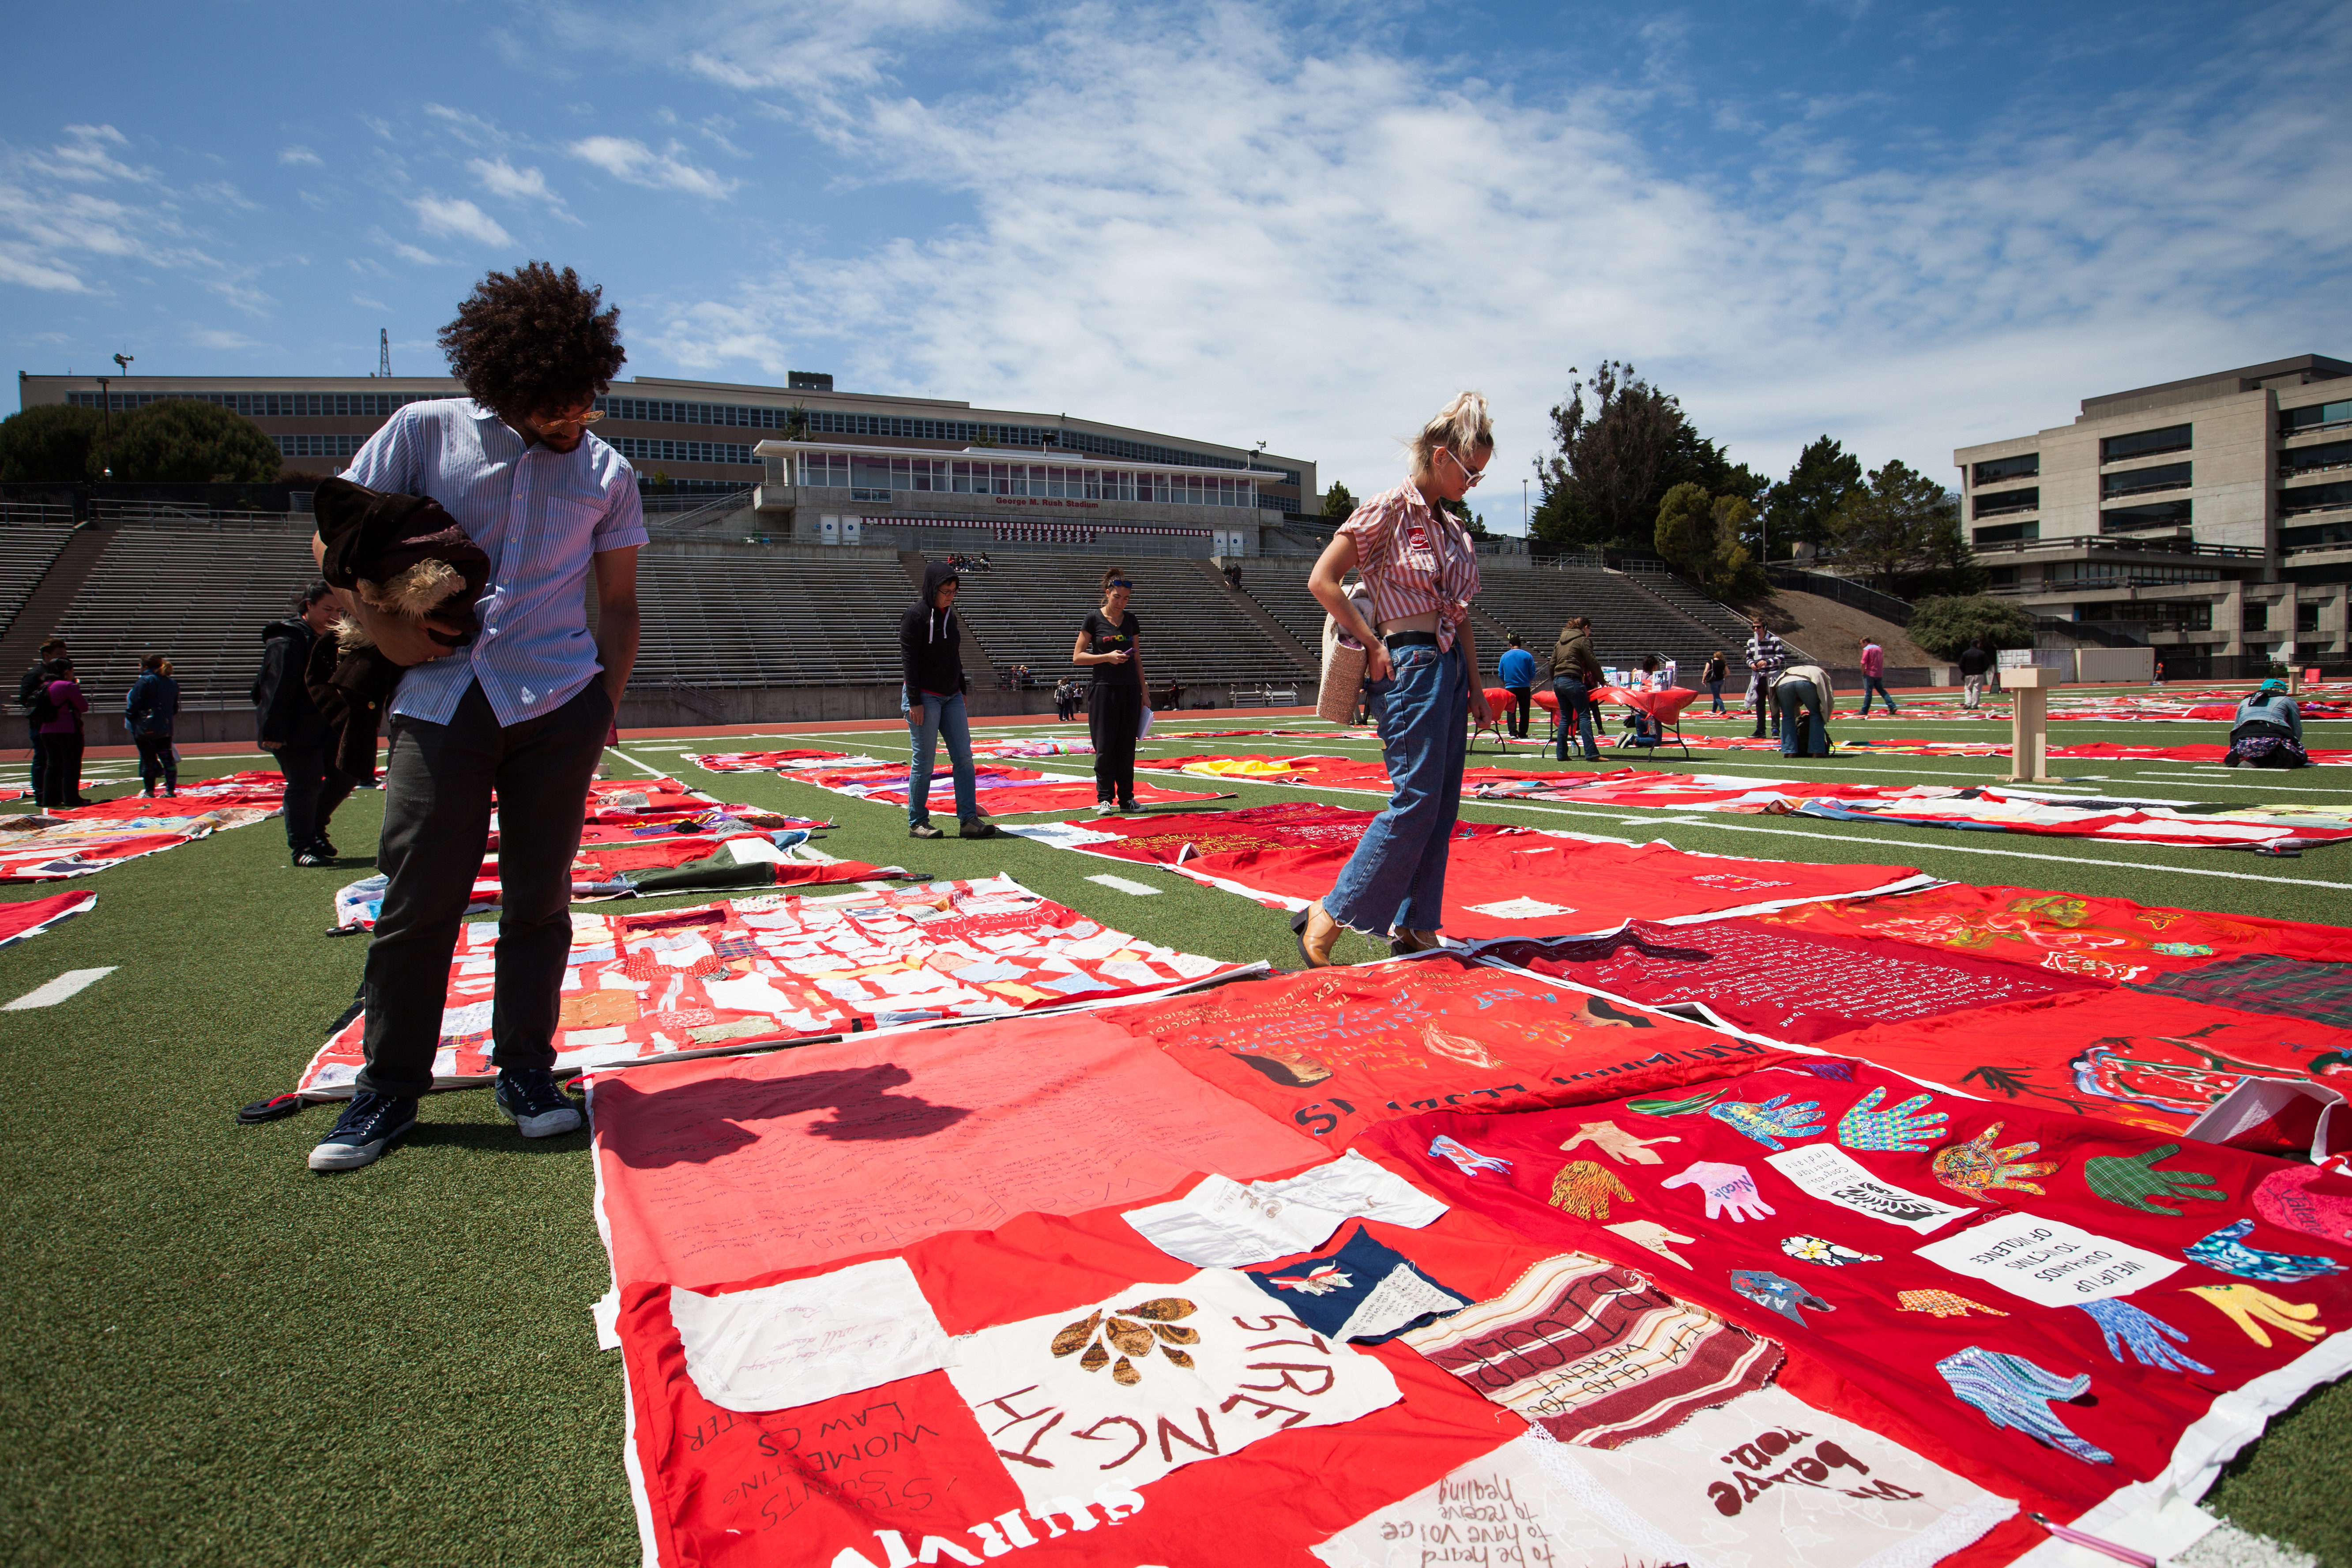 People view the exhibit of The Monument Quilt, an ongoing collection of stories from survivors of rape and abuse; the quilts are displayed on the football field of George M. Rush Stadium at City College of San Francisco Ocean Campus on Saturday, May 6, 2017. (Photo by Ekevara Kitpowsong)